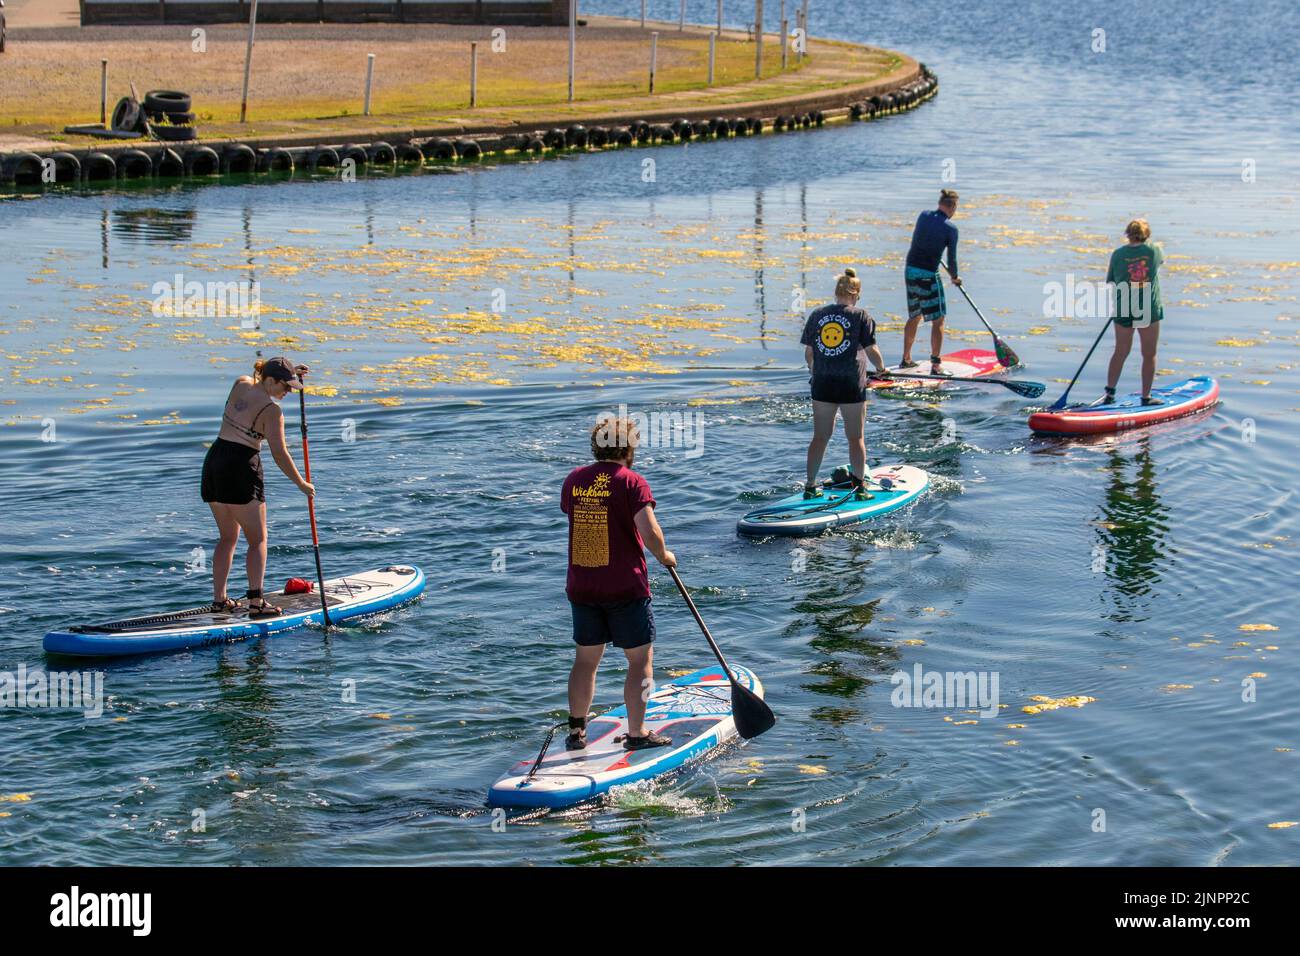 Paddle boarderin in Southport, Merseyside.  August 2022. UK Weather: Sweltering temperatures encourage the growth of Toxic blue-green algae in Marine Lake, Southport.  Harmful algal blooms in lakes are becoming an increasing problem globally linked to climate change.  The impacts of blooms include fish kills, dog deaths, higher water treatment costs and loss of recreational access.  Research is needed to understand the complexity of how climate change may impact water resources globally. Credit: MediaWorldImages/AlamyLiveNews Stock Photo